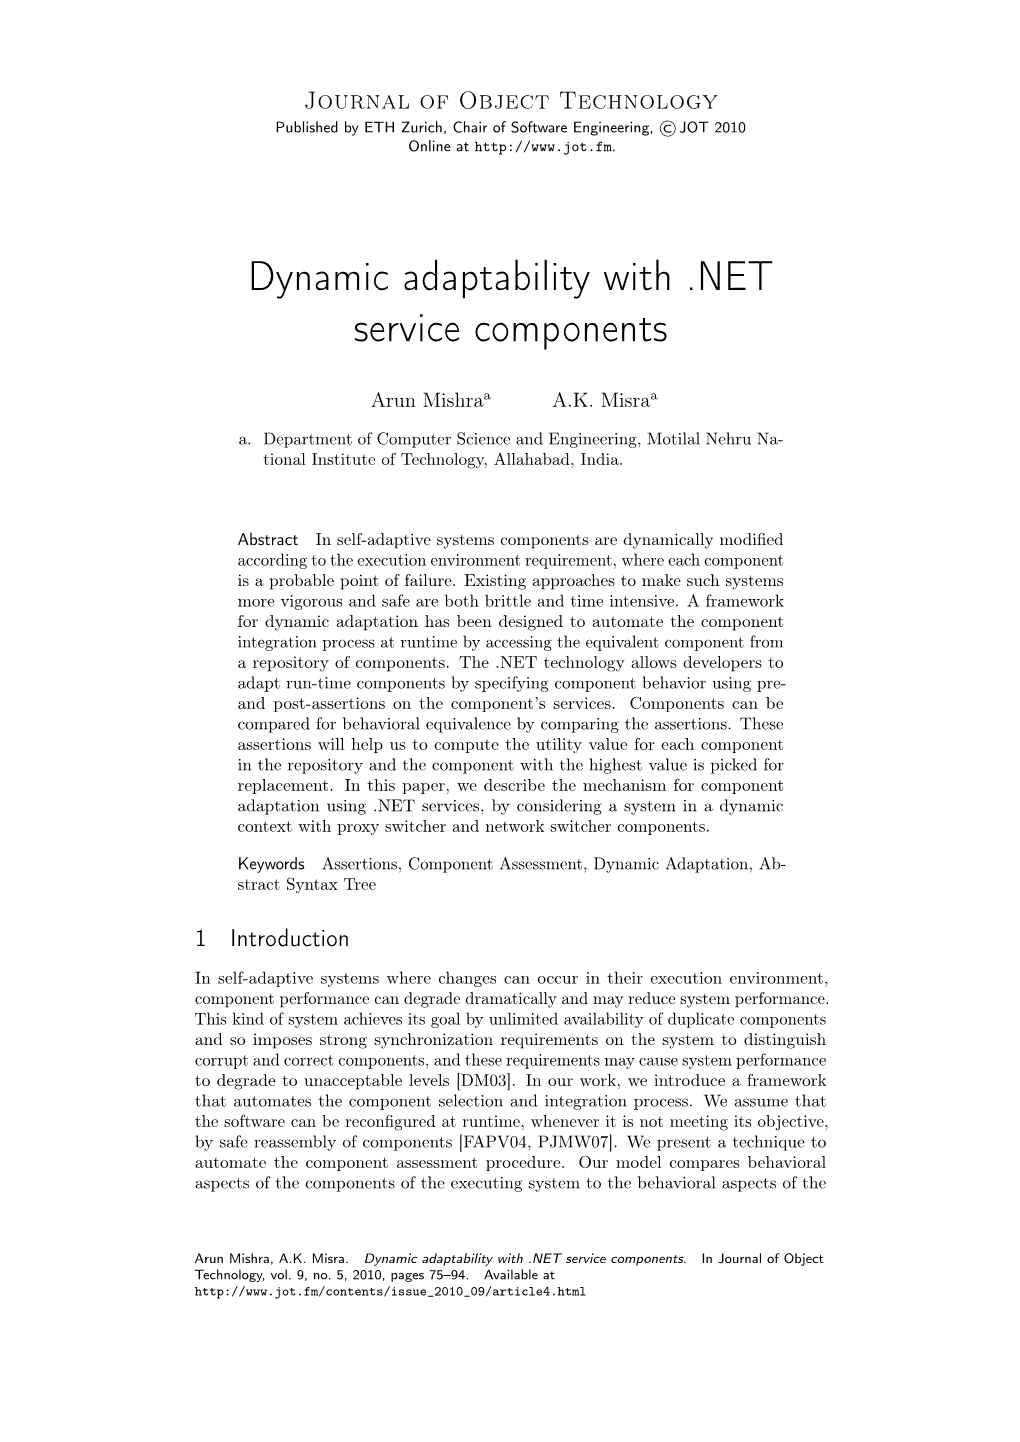 Dynamic Adaptability with .NET Service Components